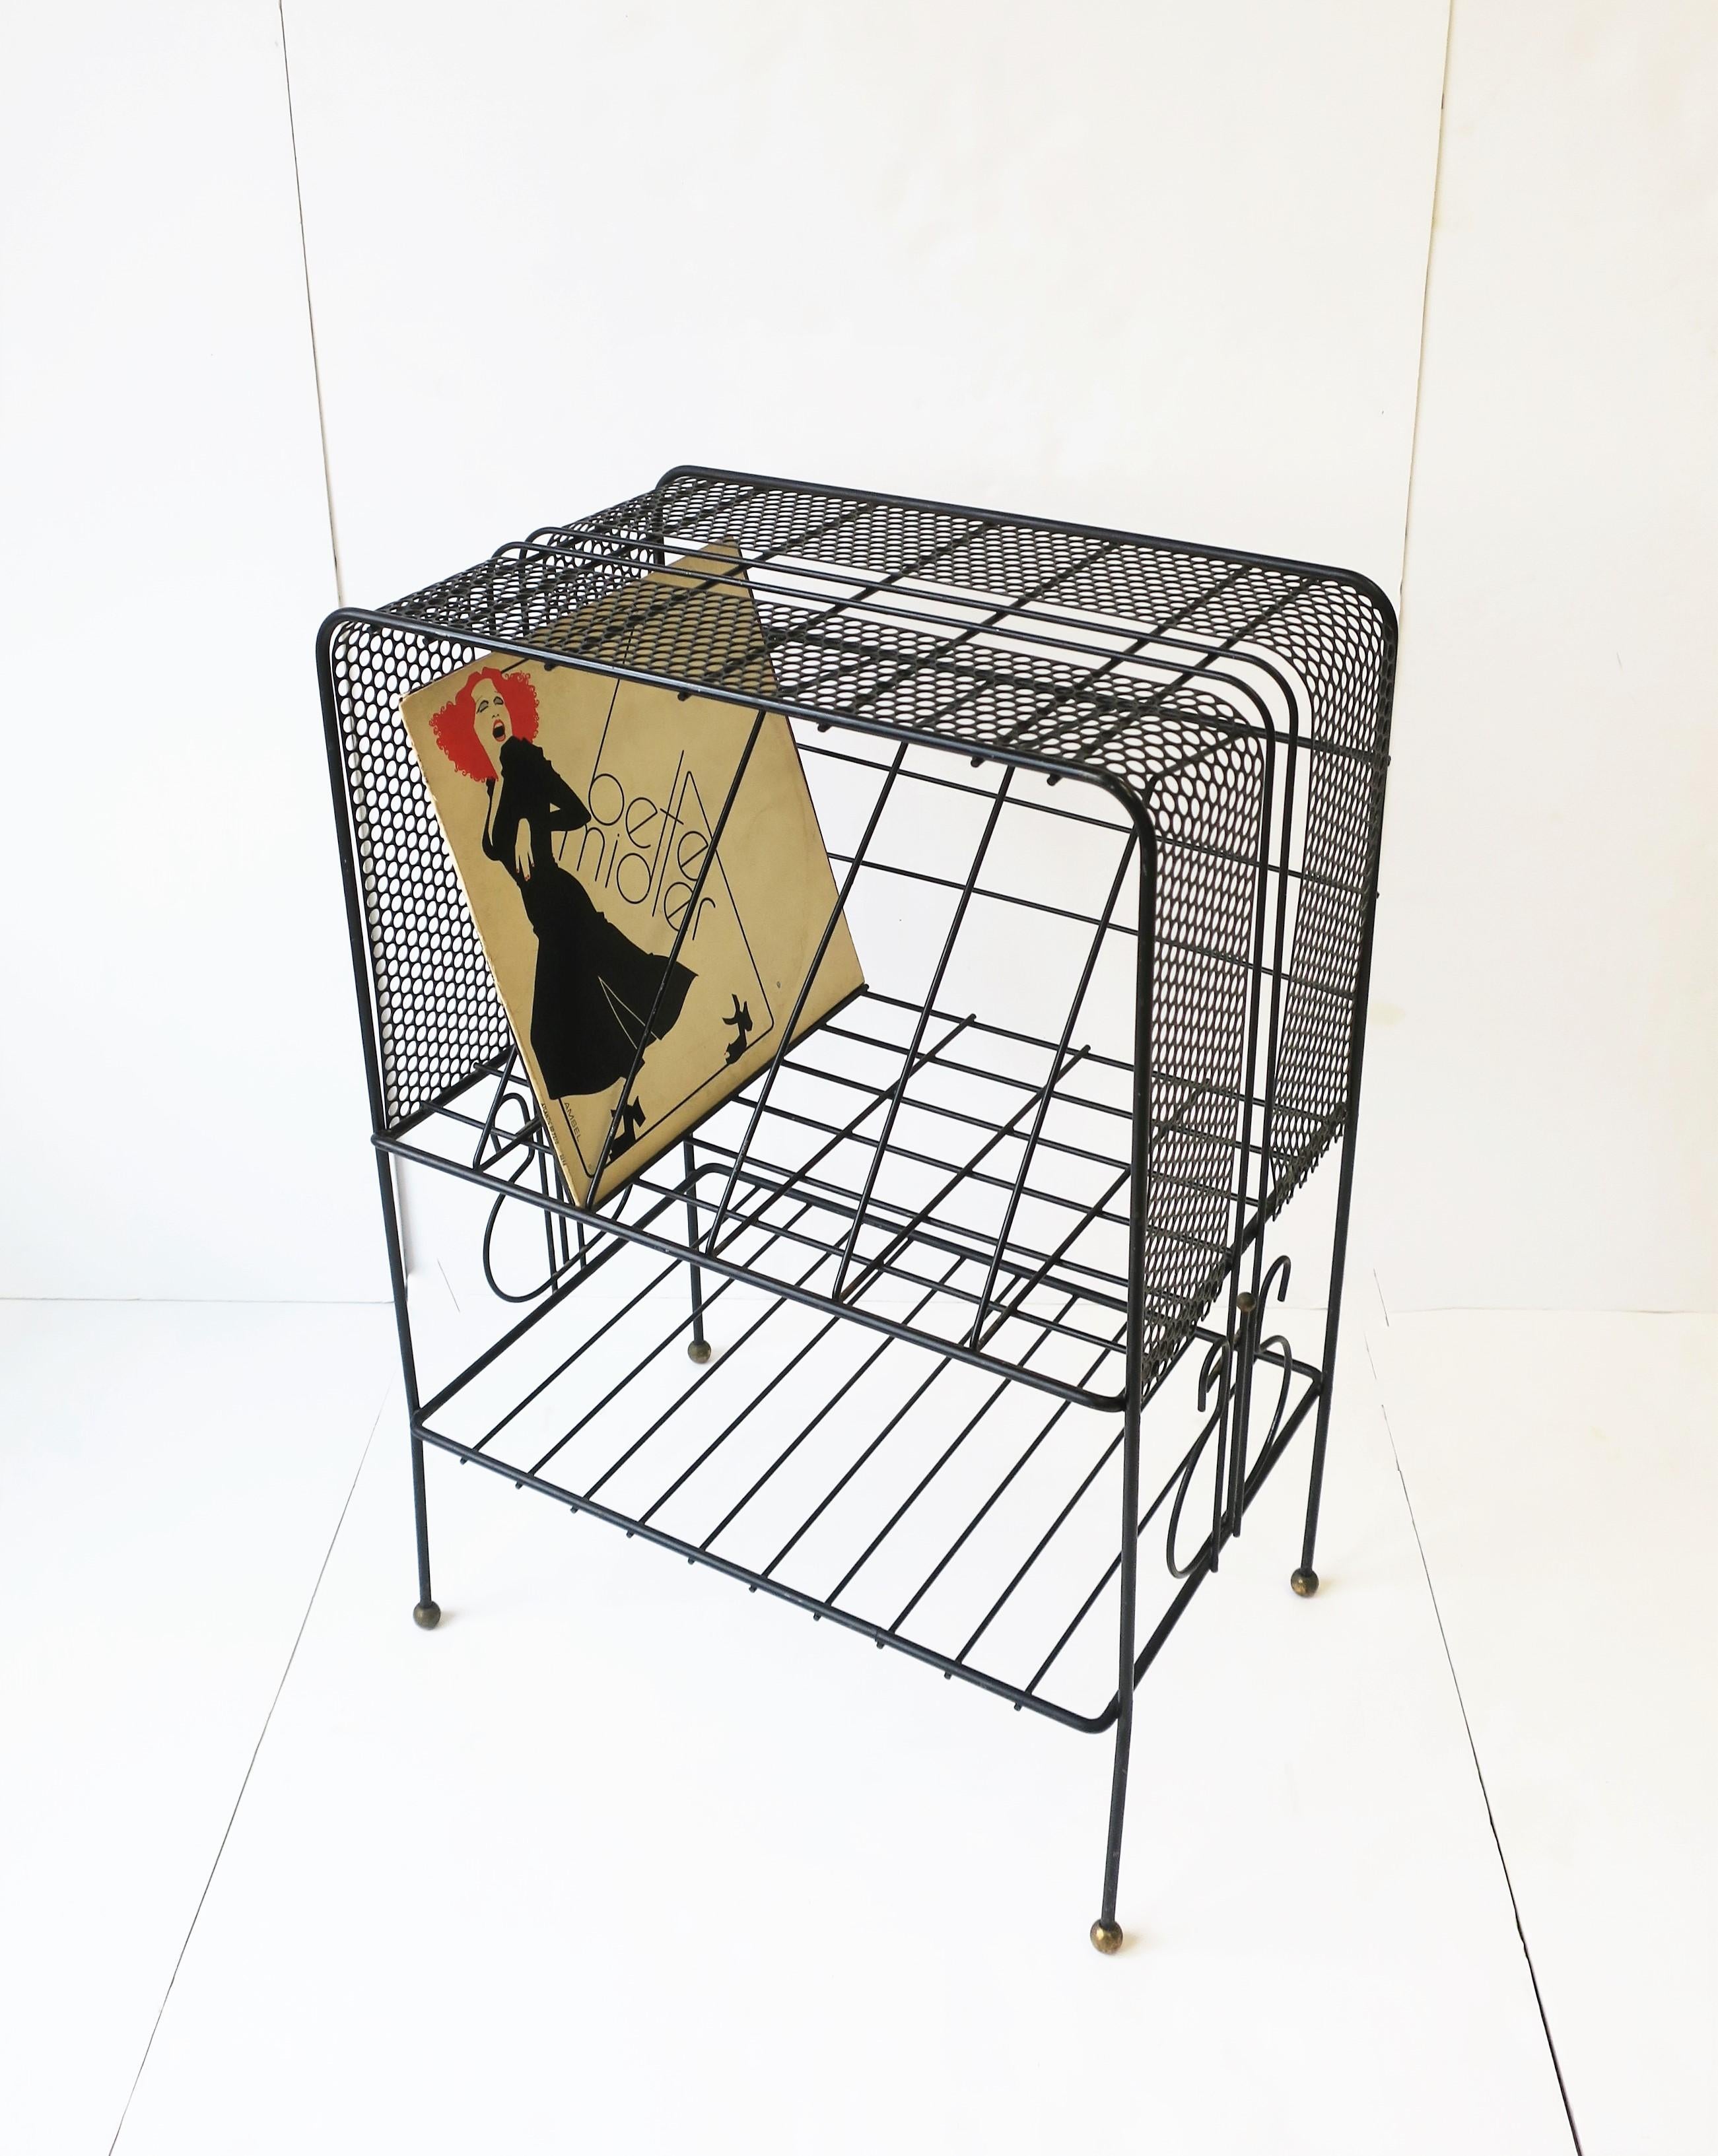 A Mid-Century Modern black record player and LP vinyl album metal holder rack stand table, circa mid-20th century, USA. Piece can support player and albums with more storage space at bottom with shelf (shown with books.) There are six (6) 3